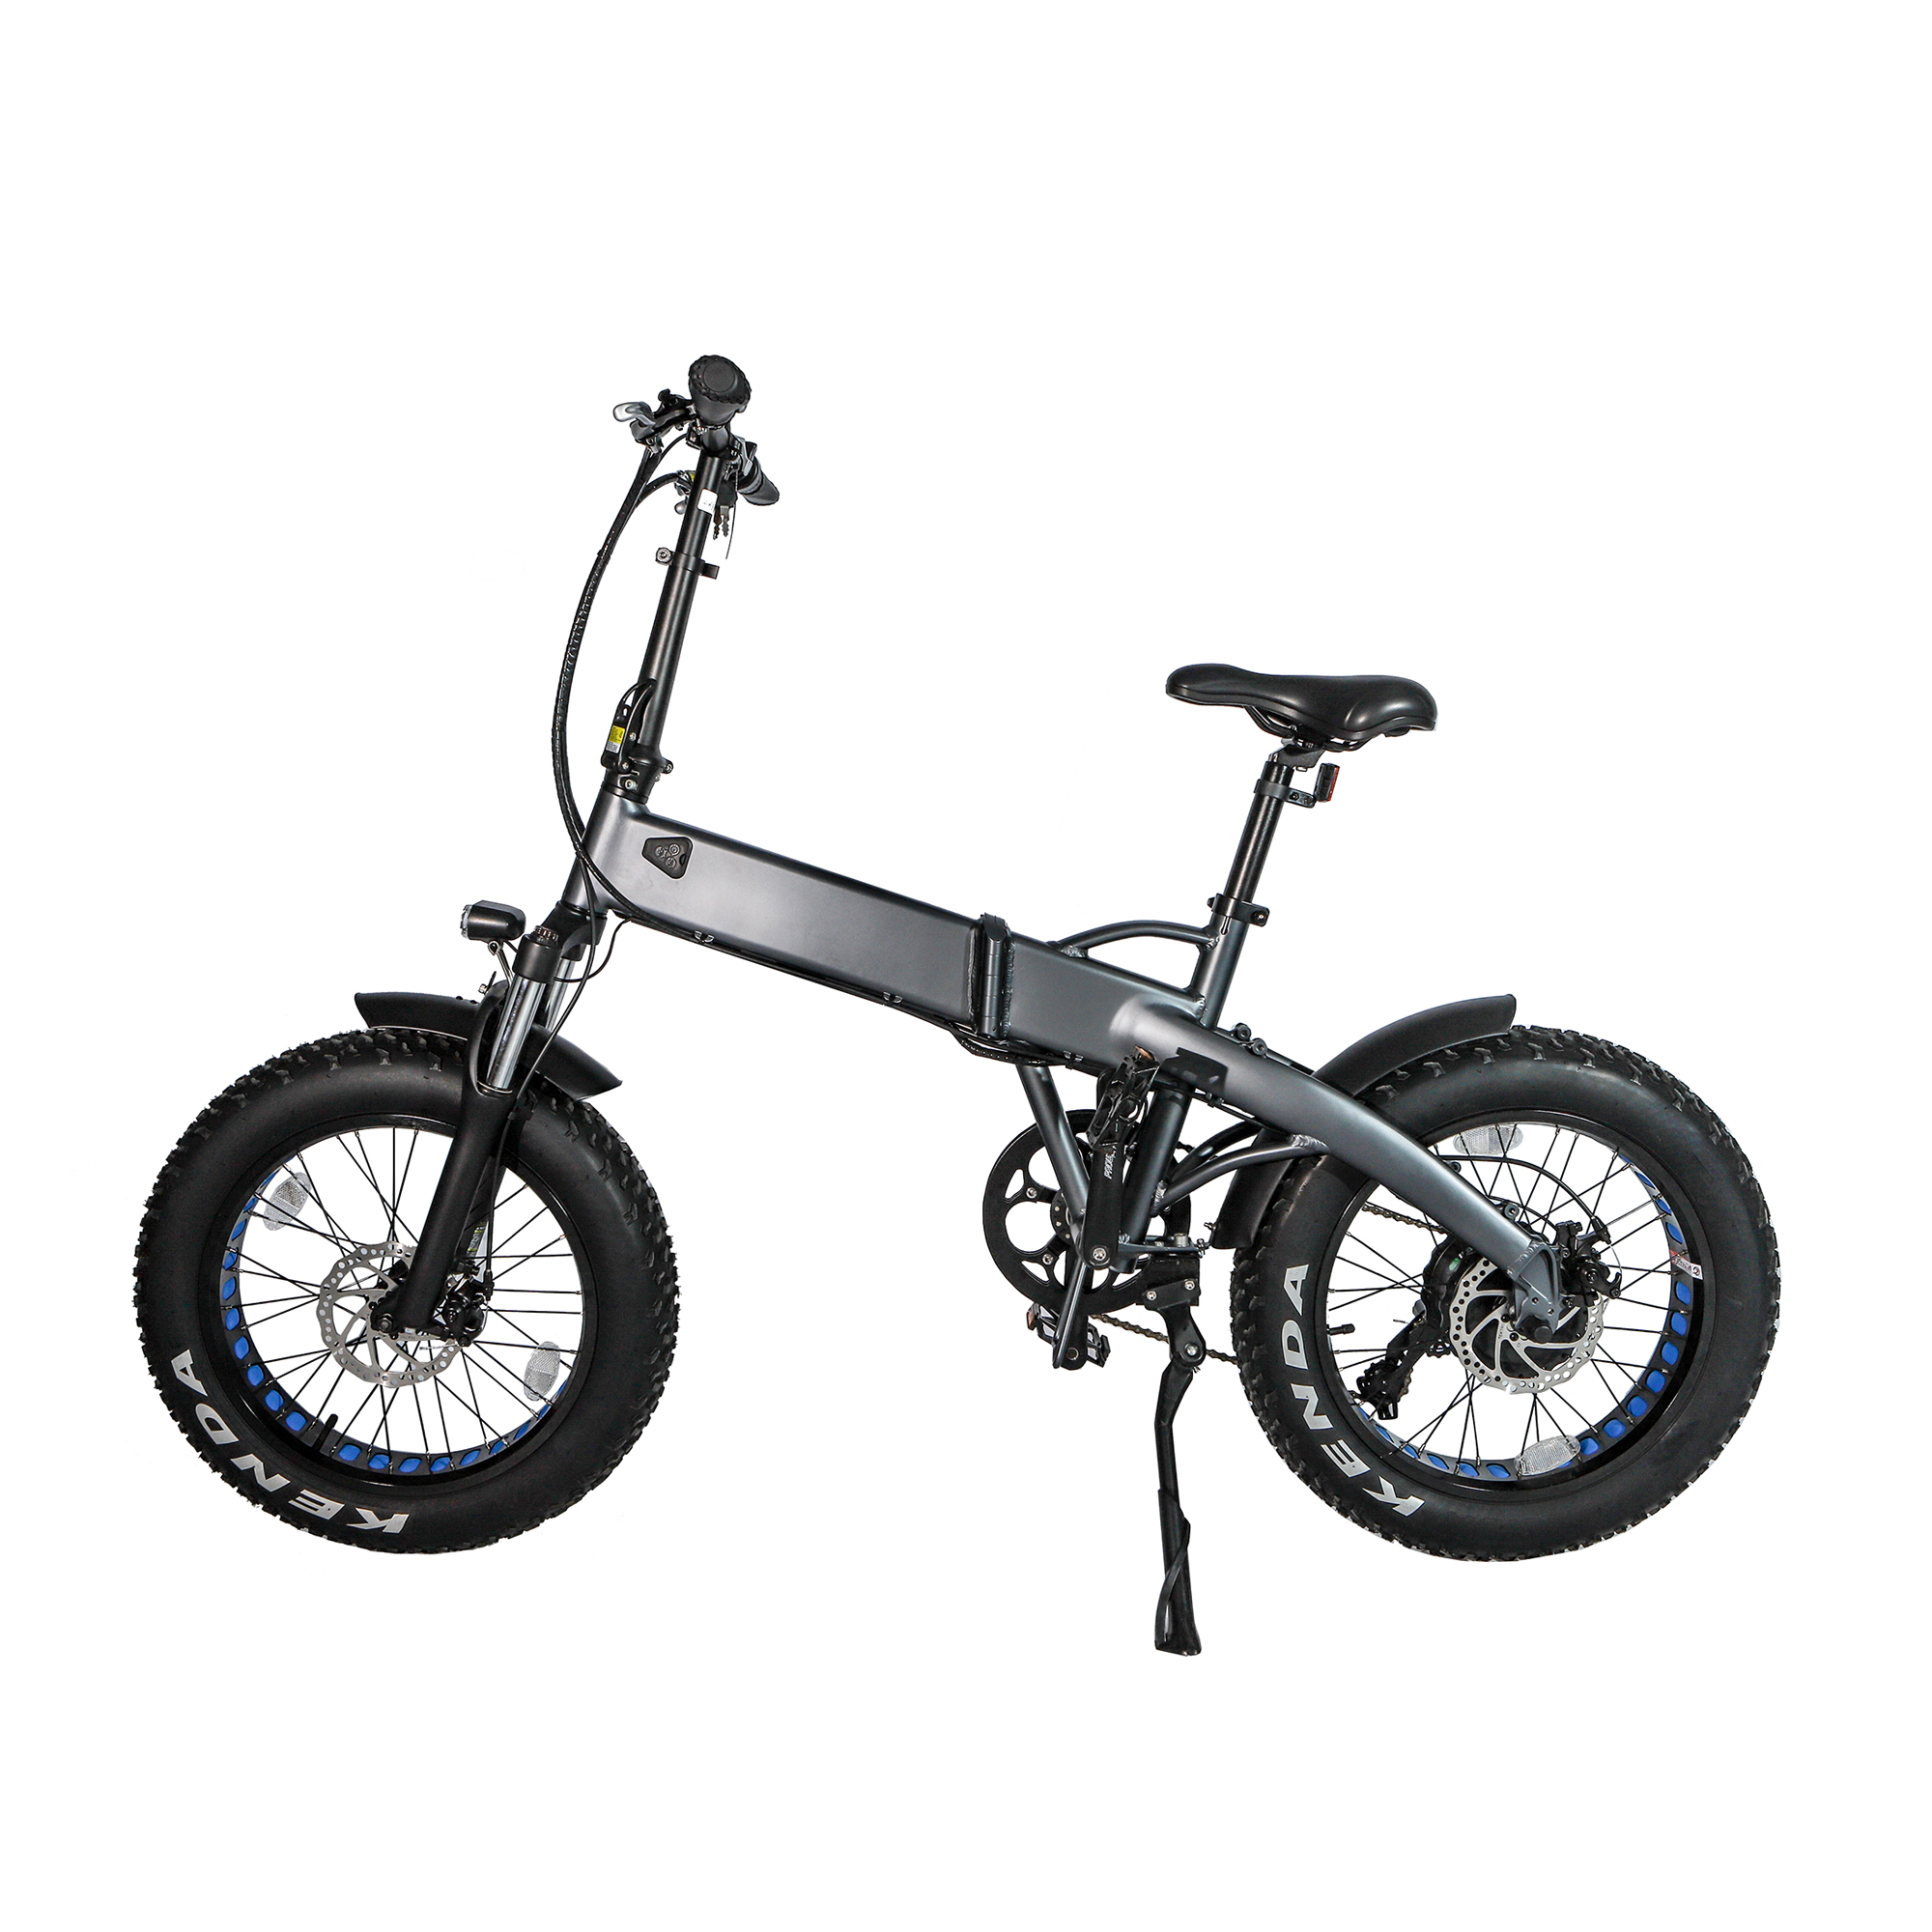 How to choose the suitable electric bicycle